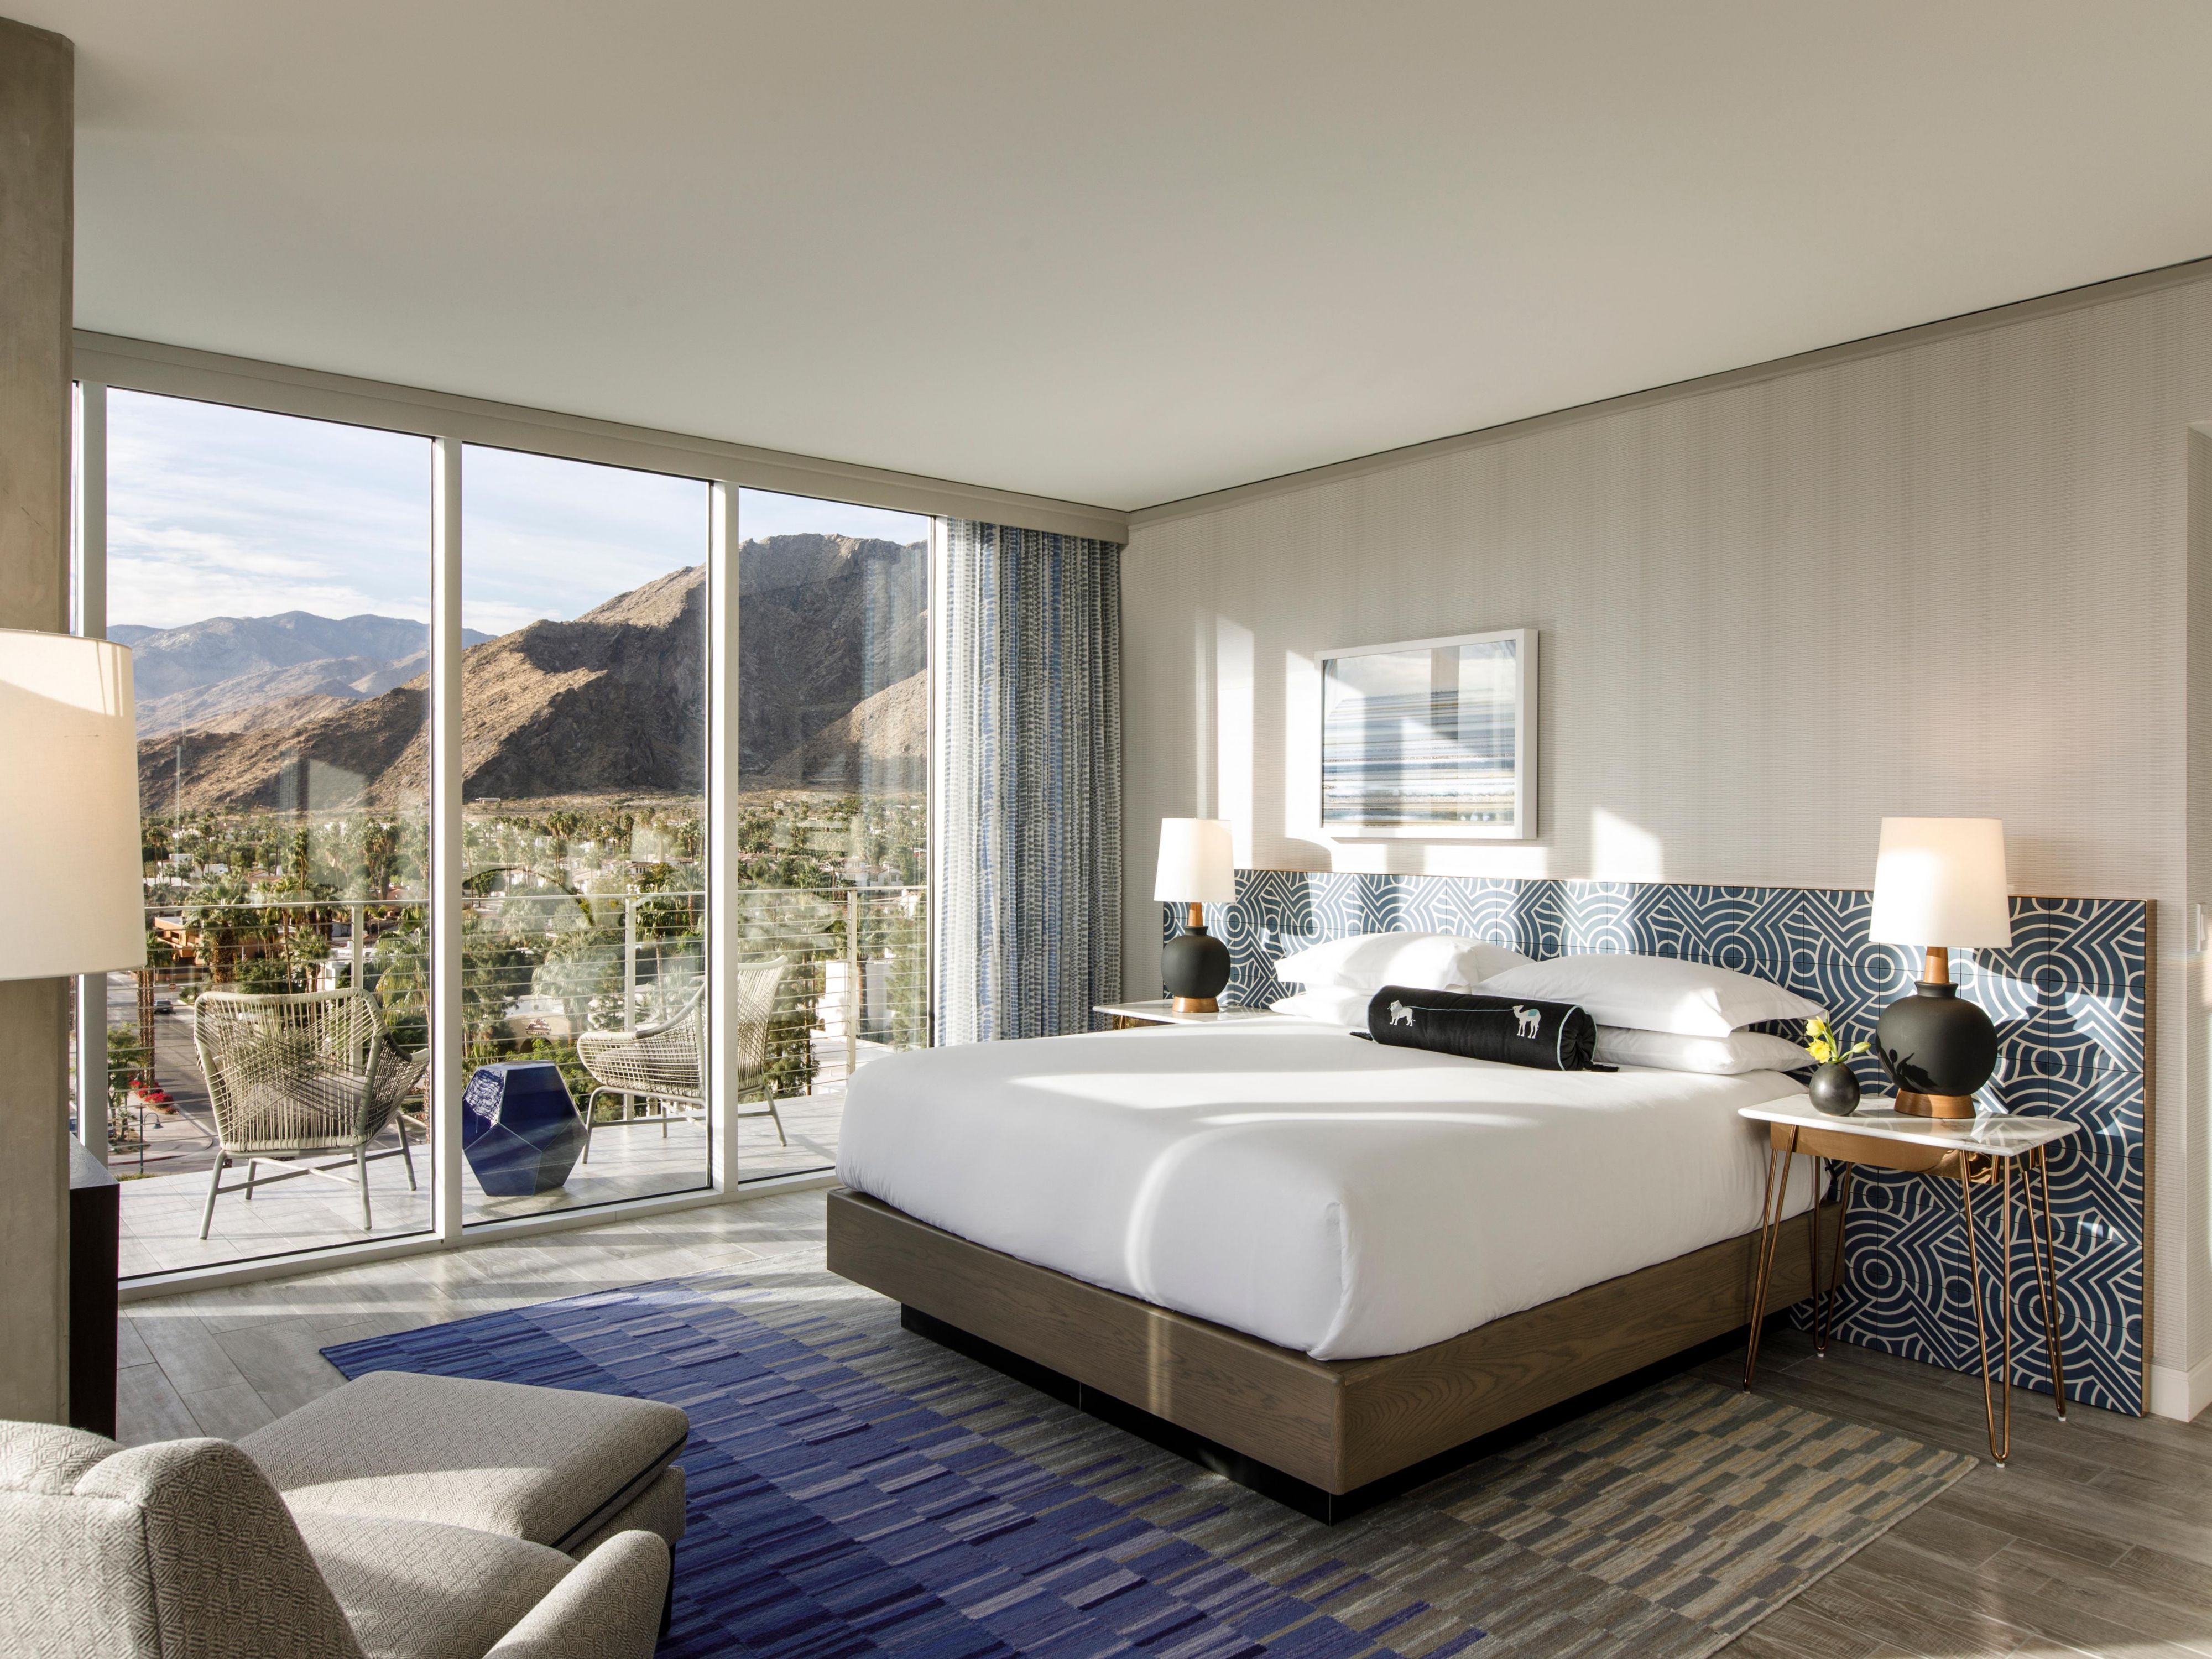 Elegant hotel room with floor to ceiling windows looking out at a mountain range